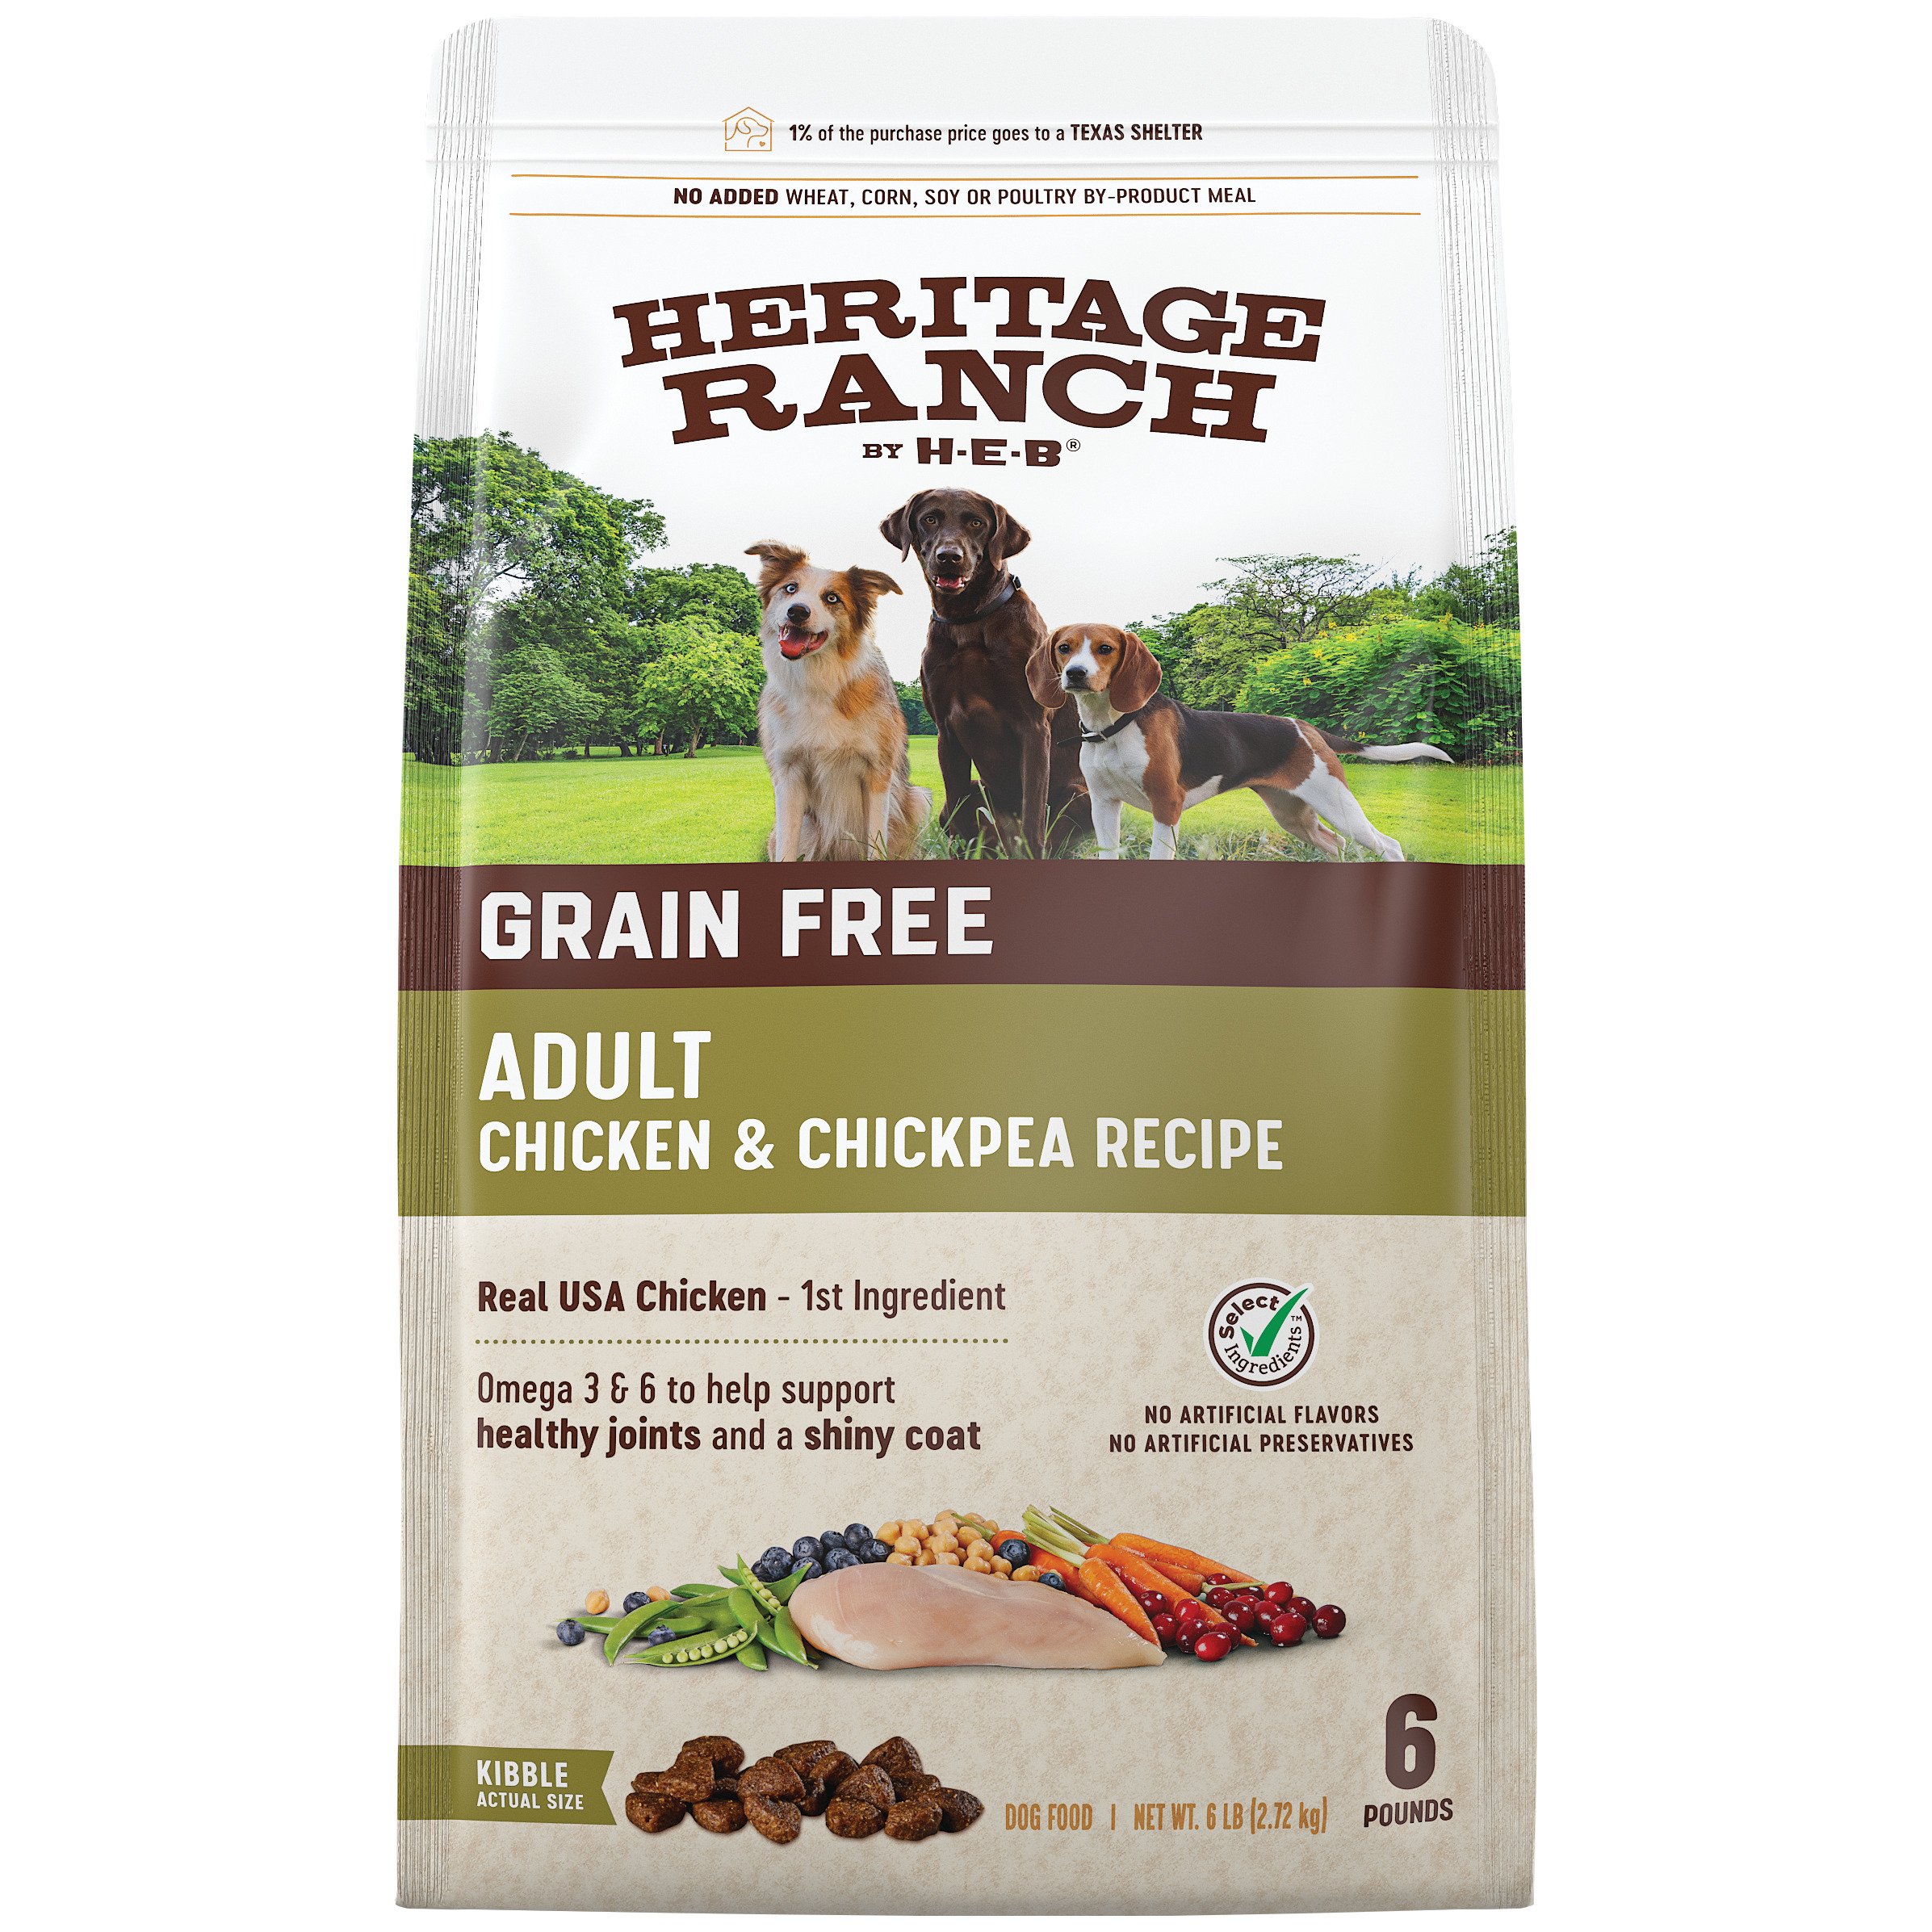 Heritage Ranch by HEB Grain Free Chicken & Chickpea Recipe Dry Dog